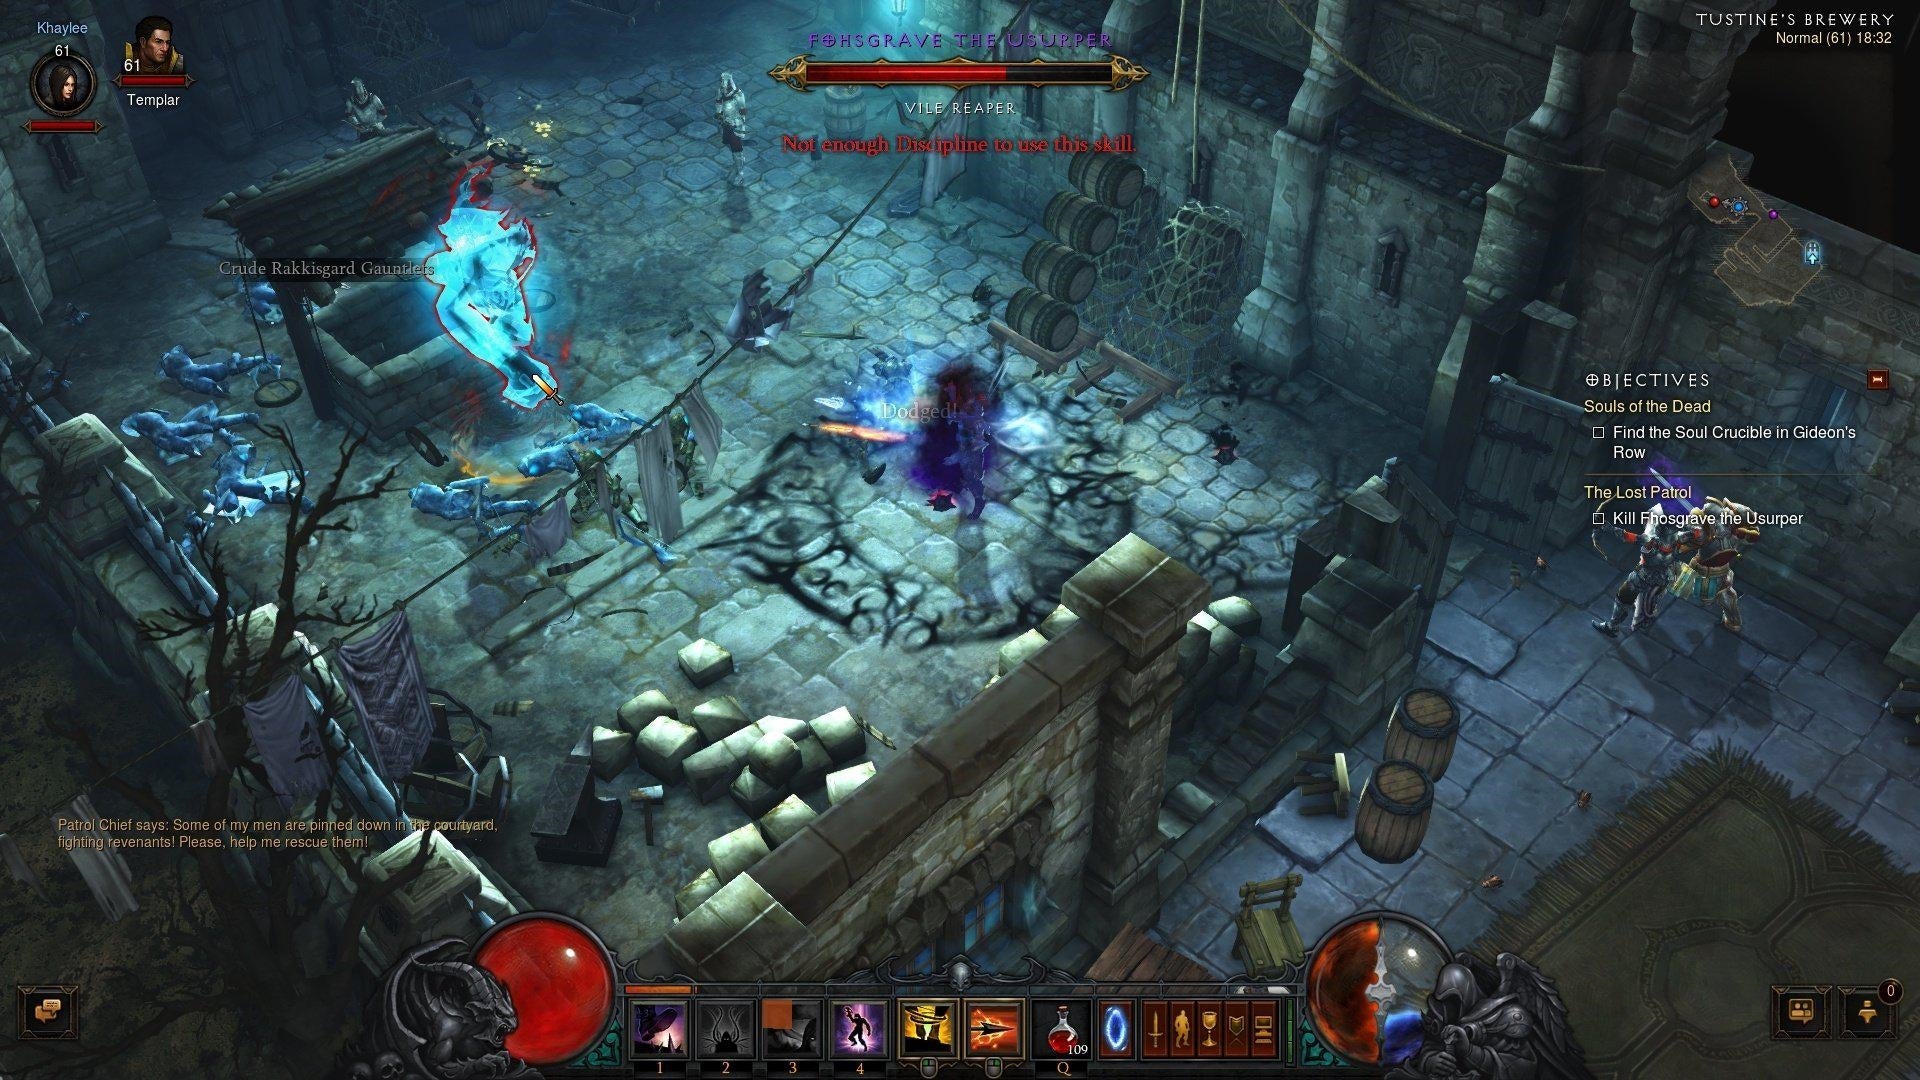 Image for Diablo 3: Reaper of Souls console edition receiving patch 2.1.0 very soon